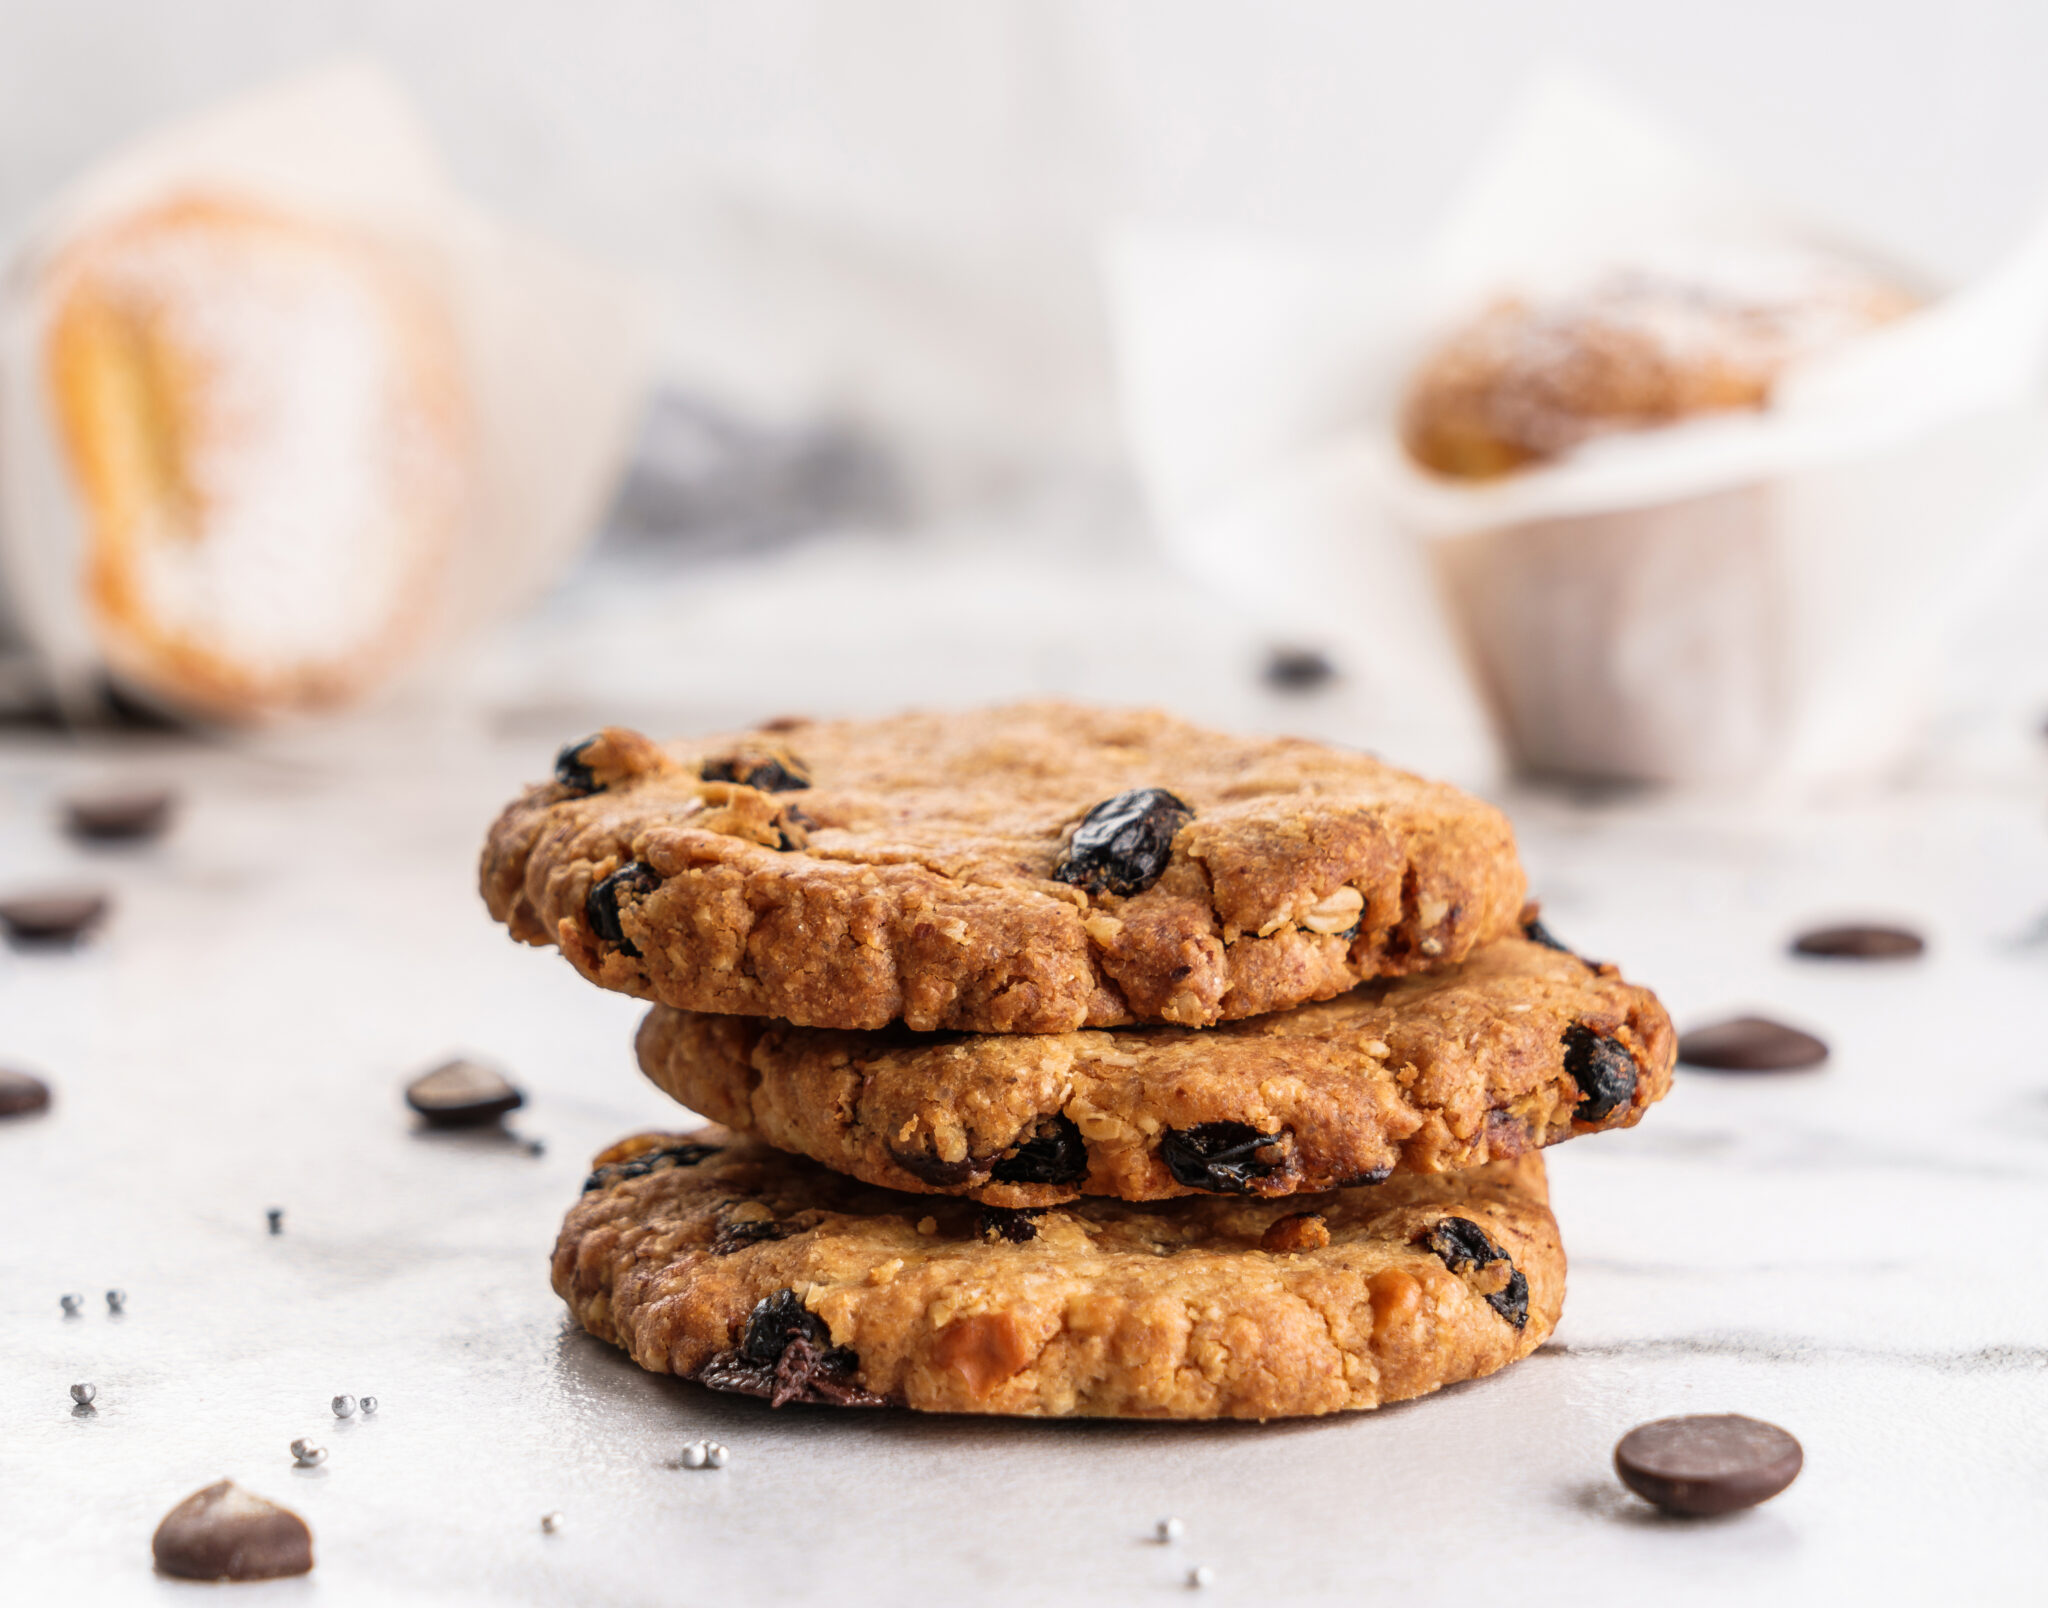 Meals That Heal - Heart Healthy Vegan Oatmeal Chocolate Chip Cookies - The Holistic Highway